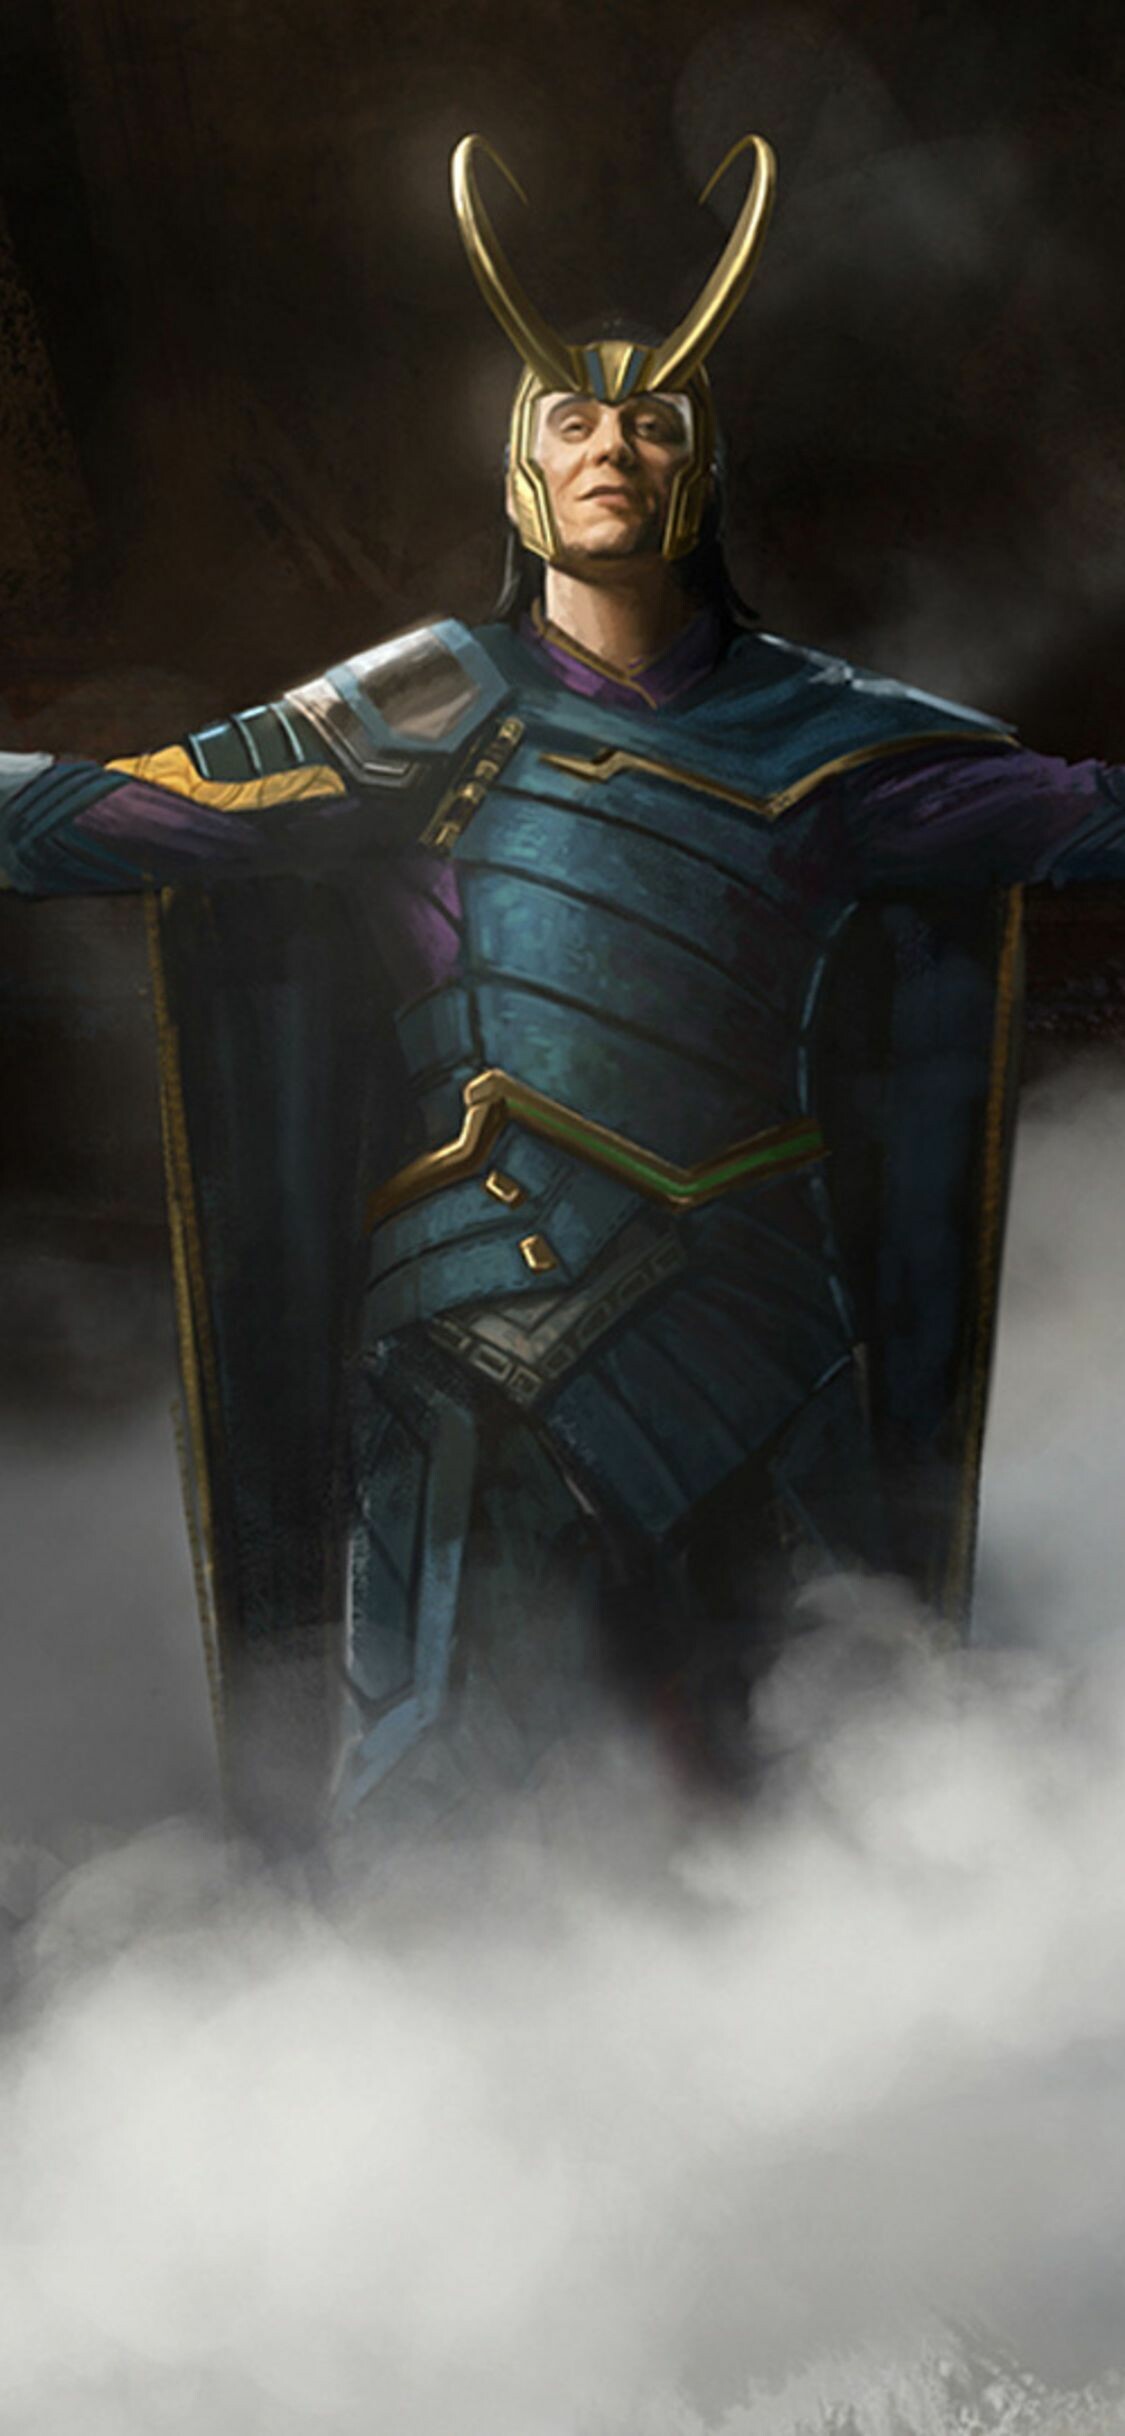 Loki (TV Series): God of Mischief, has particular antagonism for his adoptive brother Thor. 1130x2440 HD Background.